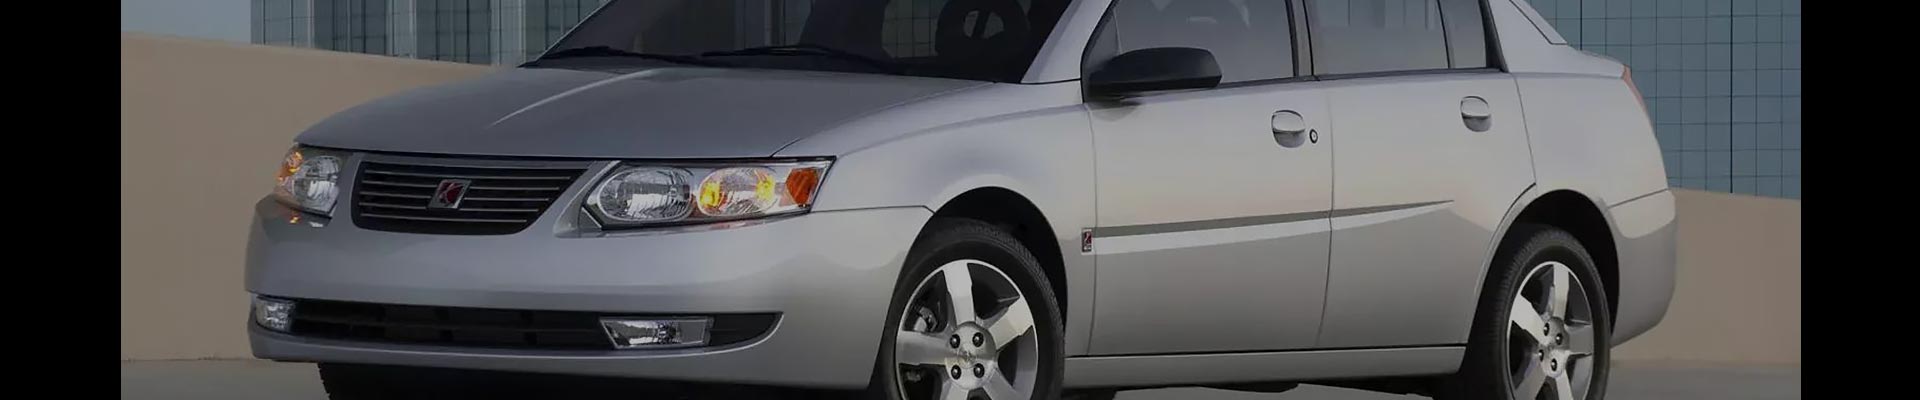 Shop Replacement and OEM 2006 Saturn Ion Parts with Discounted Price on the Net